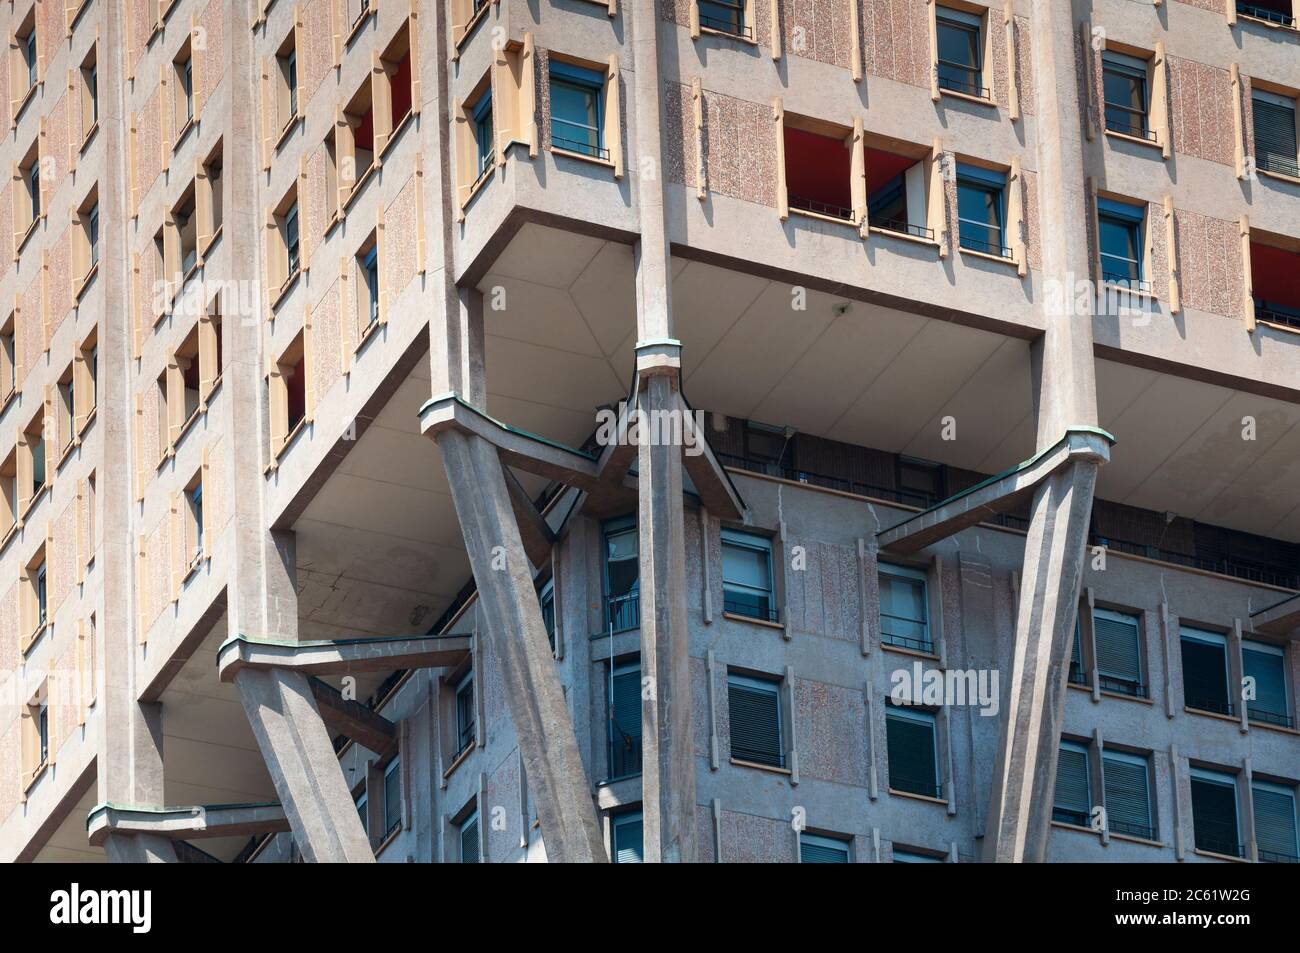 Italy, Lombardy, Milan, Torre Velasca Tower by Studio BBPR, Detail Facade Stock Photo